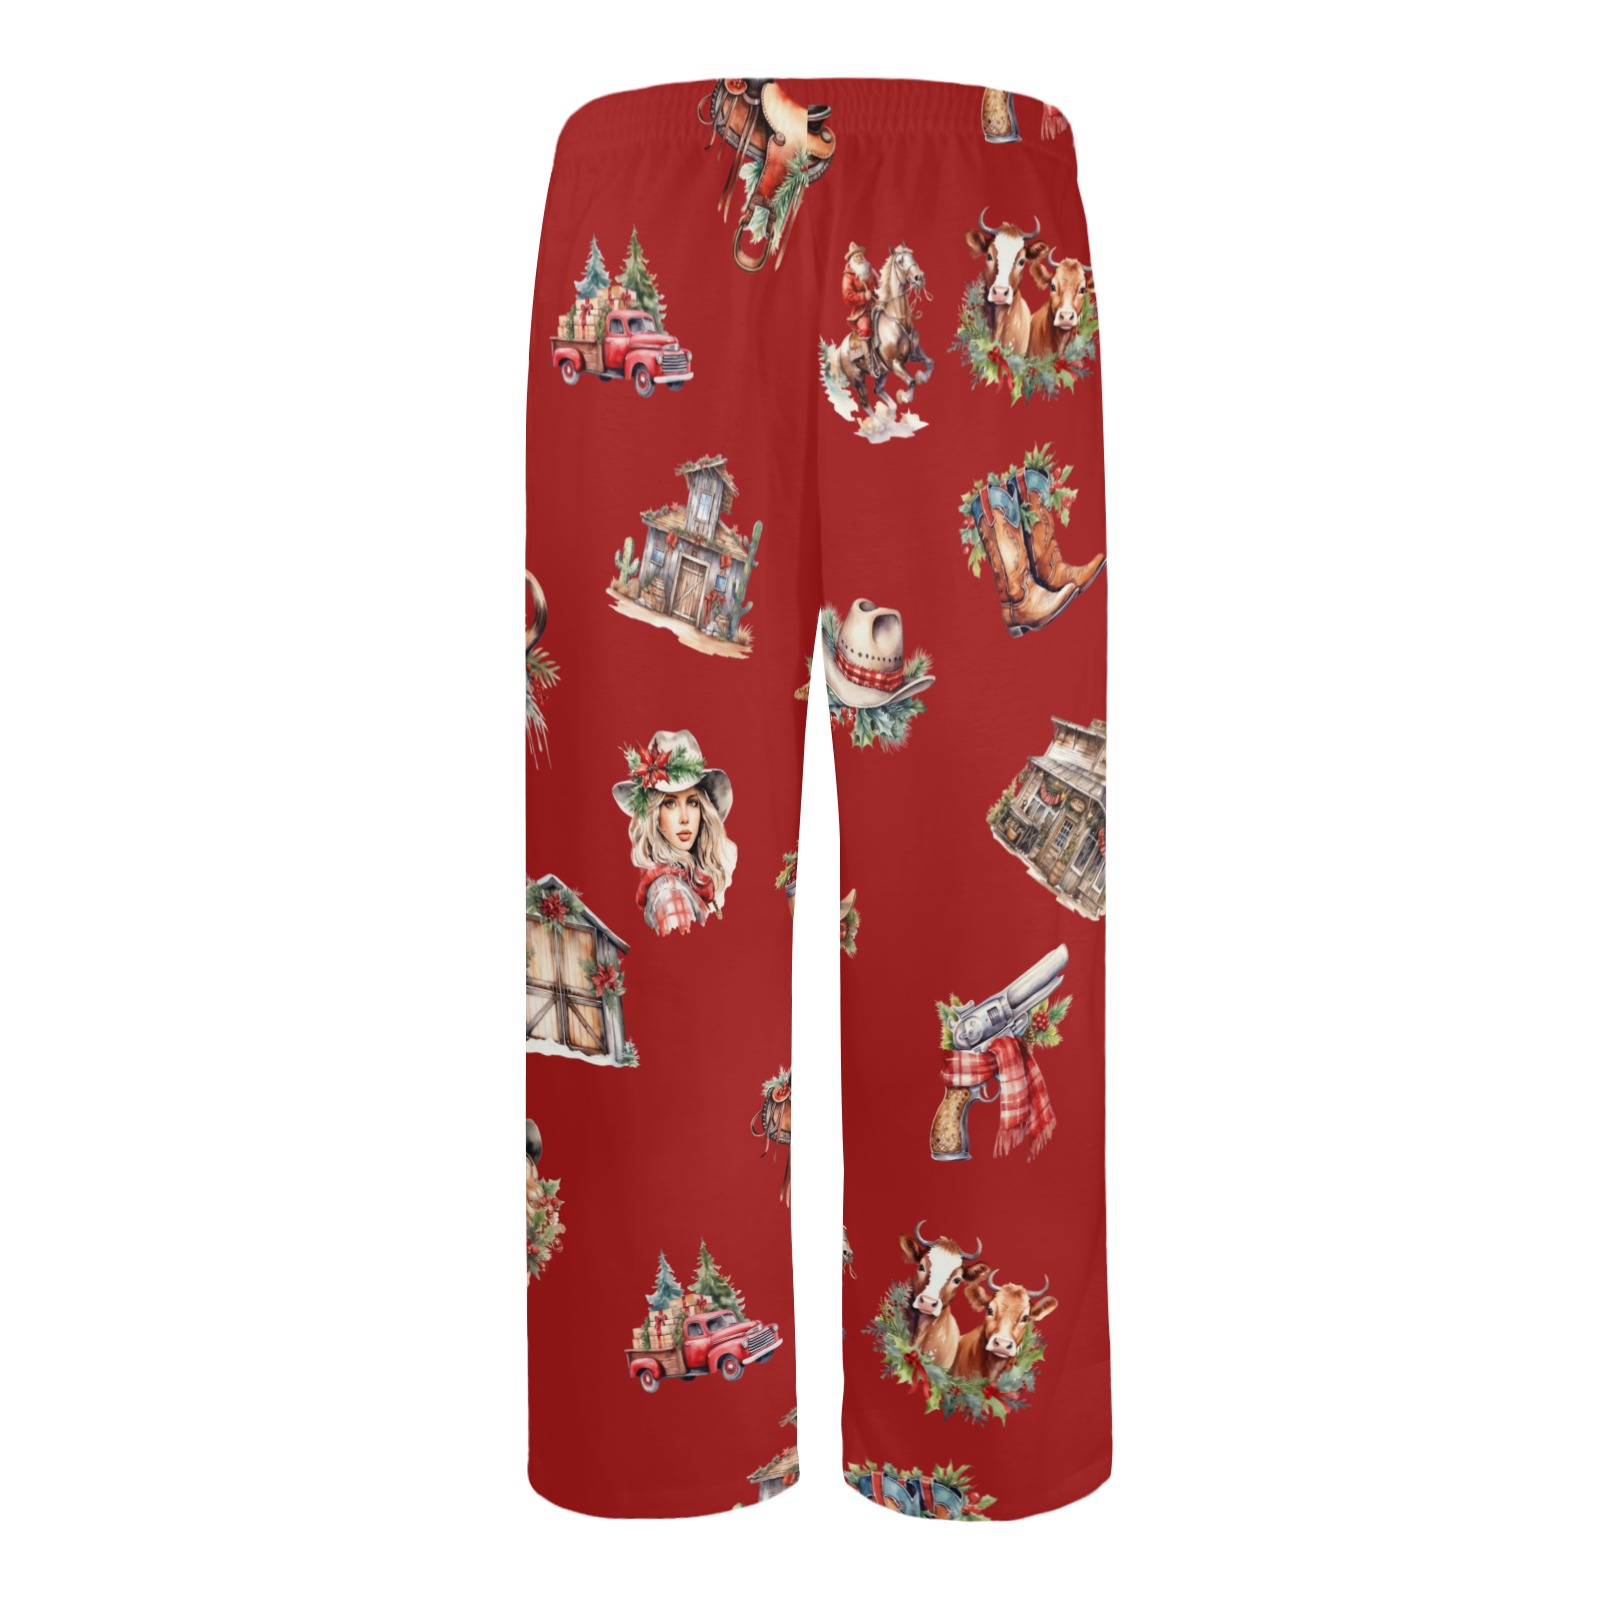 WesternChristmasPrint Red USA Men's Pajama Trousers without Pockets